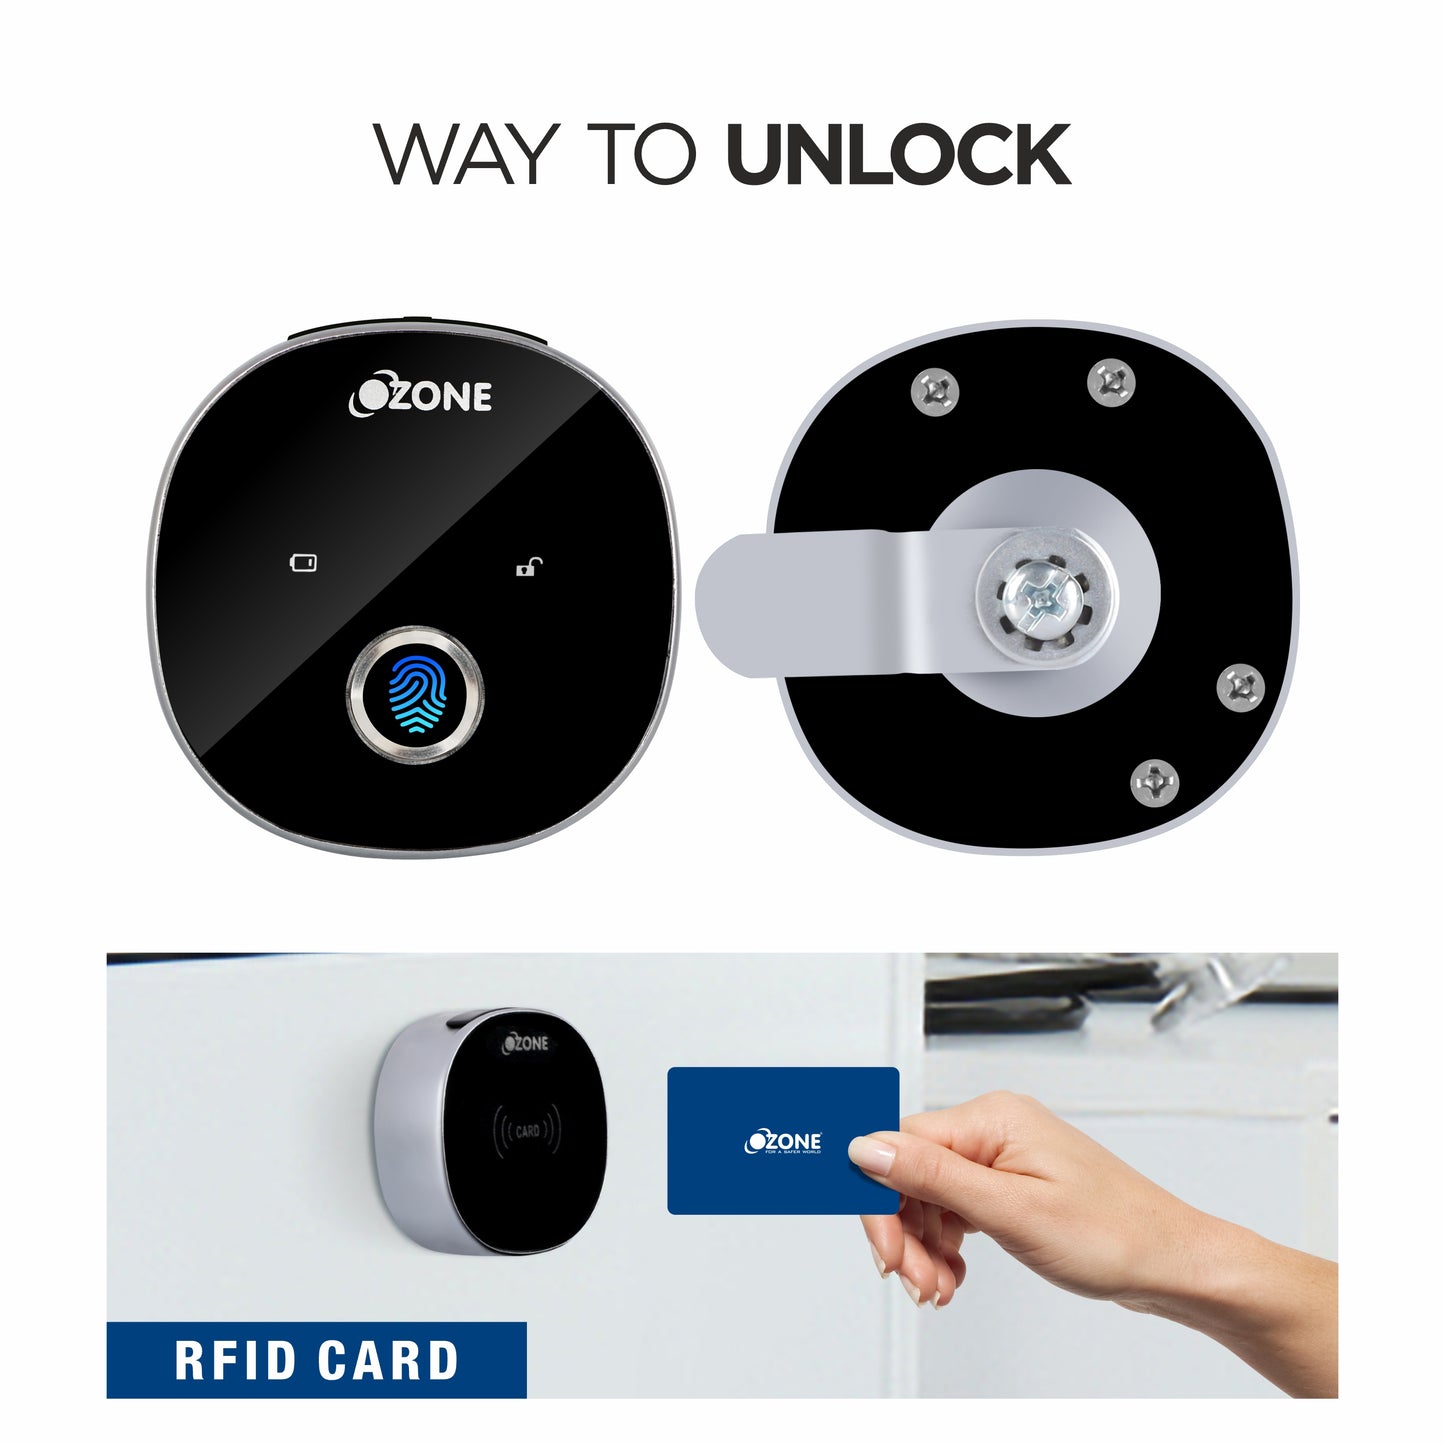 Ozone Smart Furniture Lock with Fingerprint Access for Wooden Cabinets, Wardrobes & Drawers